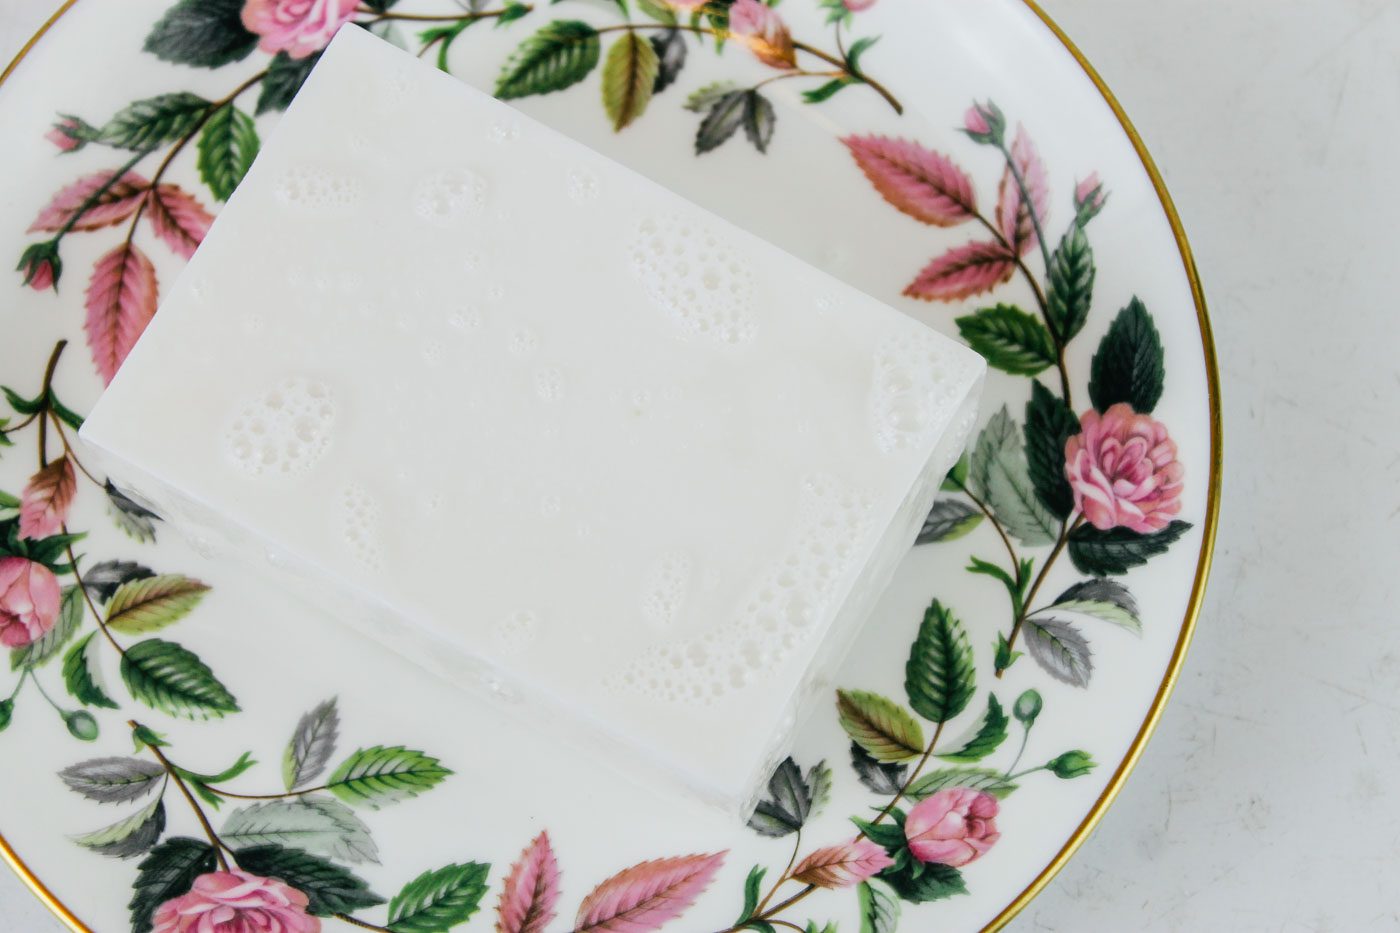 melt and pour shampoo bar sitting on a floral plate